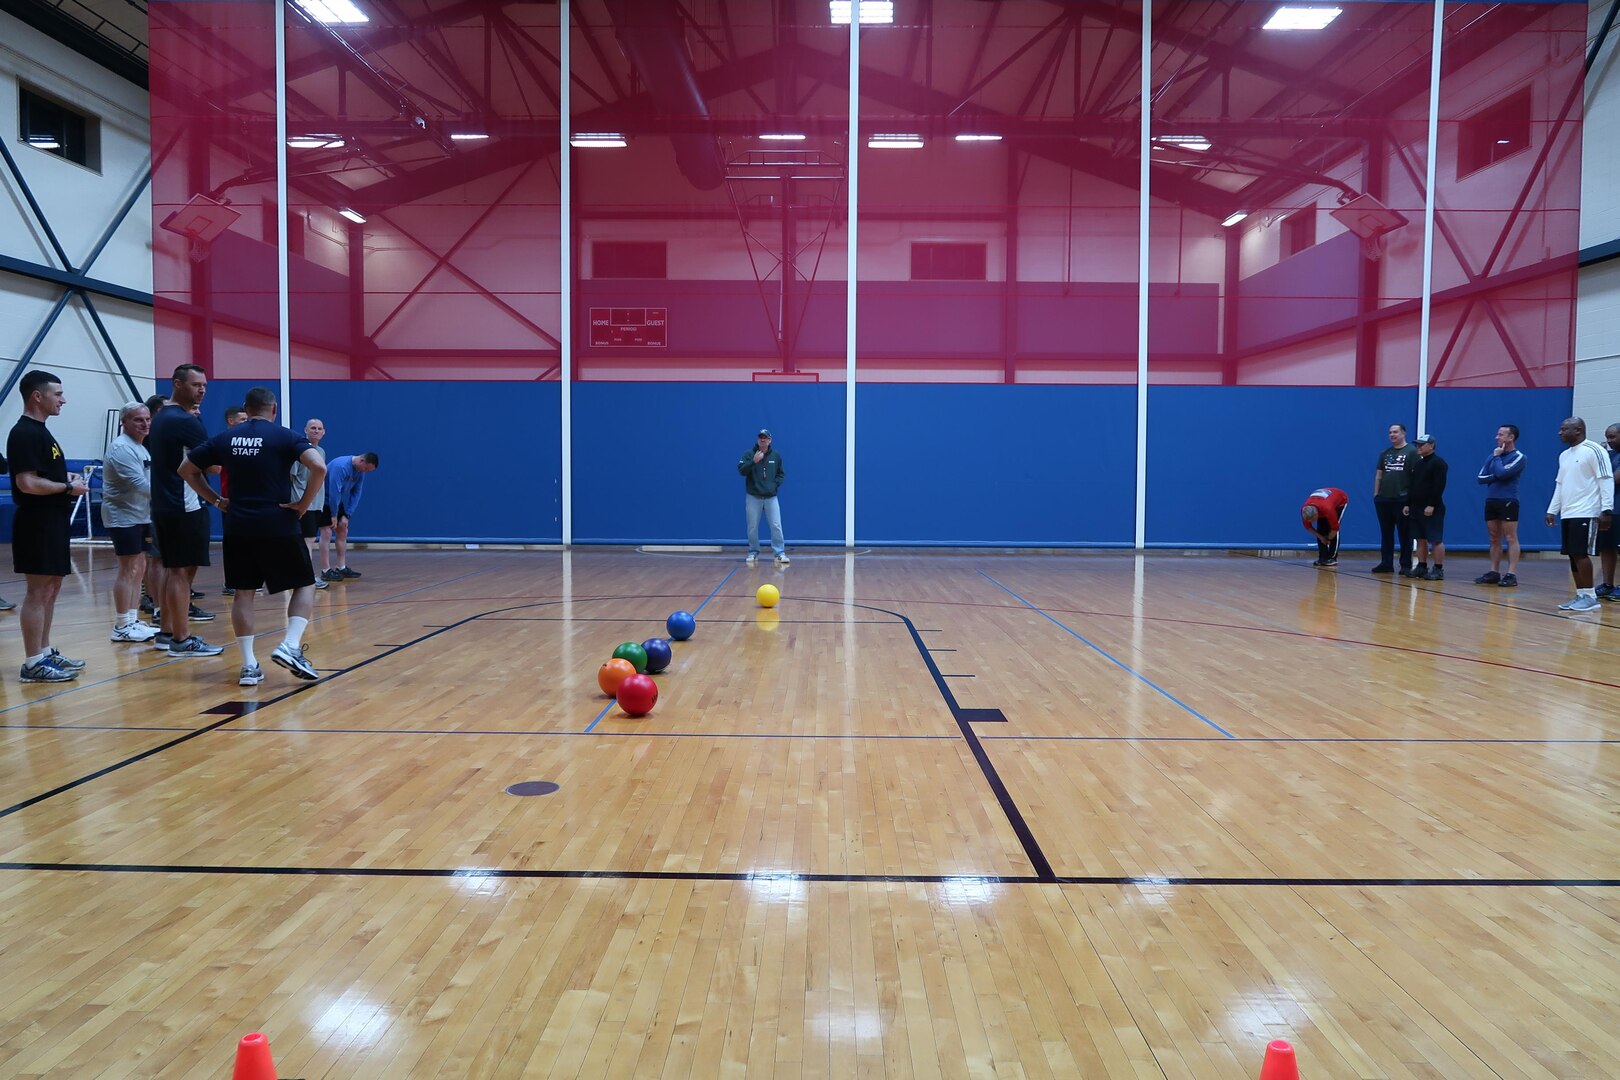 The “East” and “West” teams faced off in an early morning round of dodgeball.